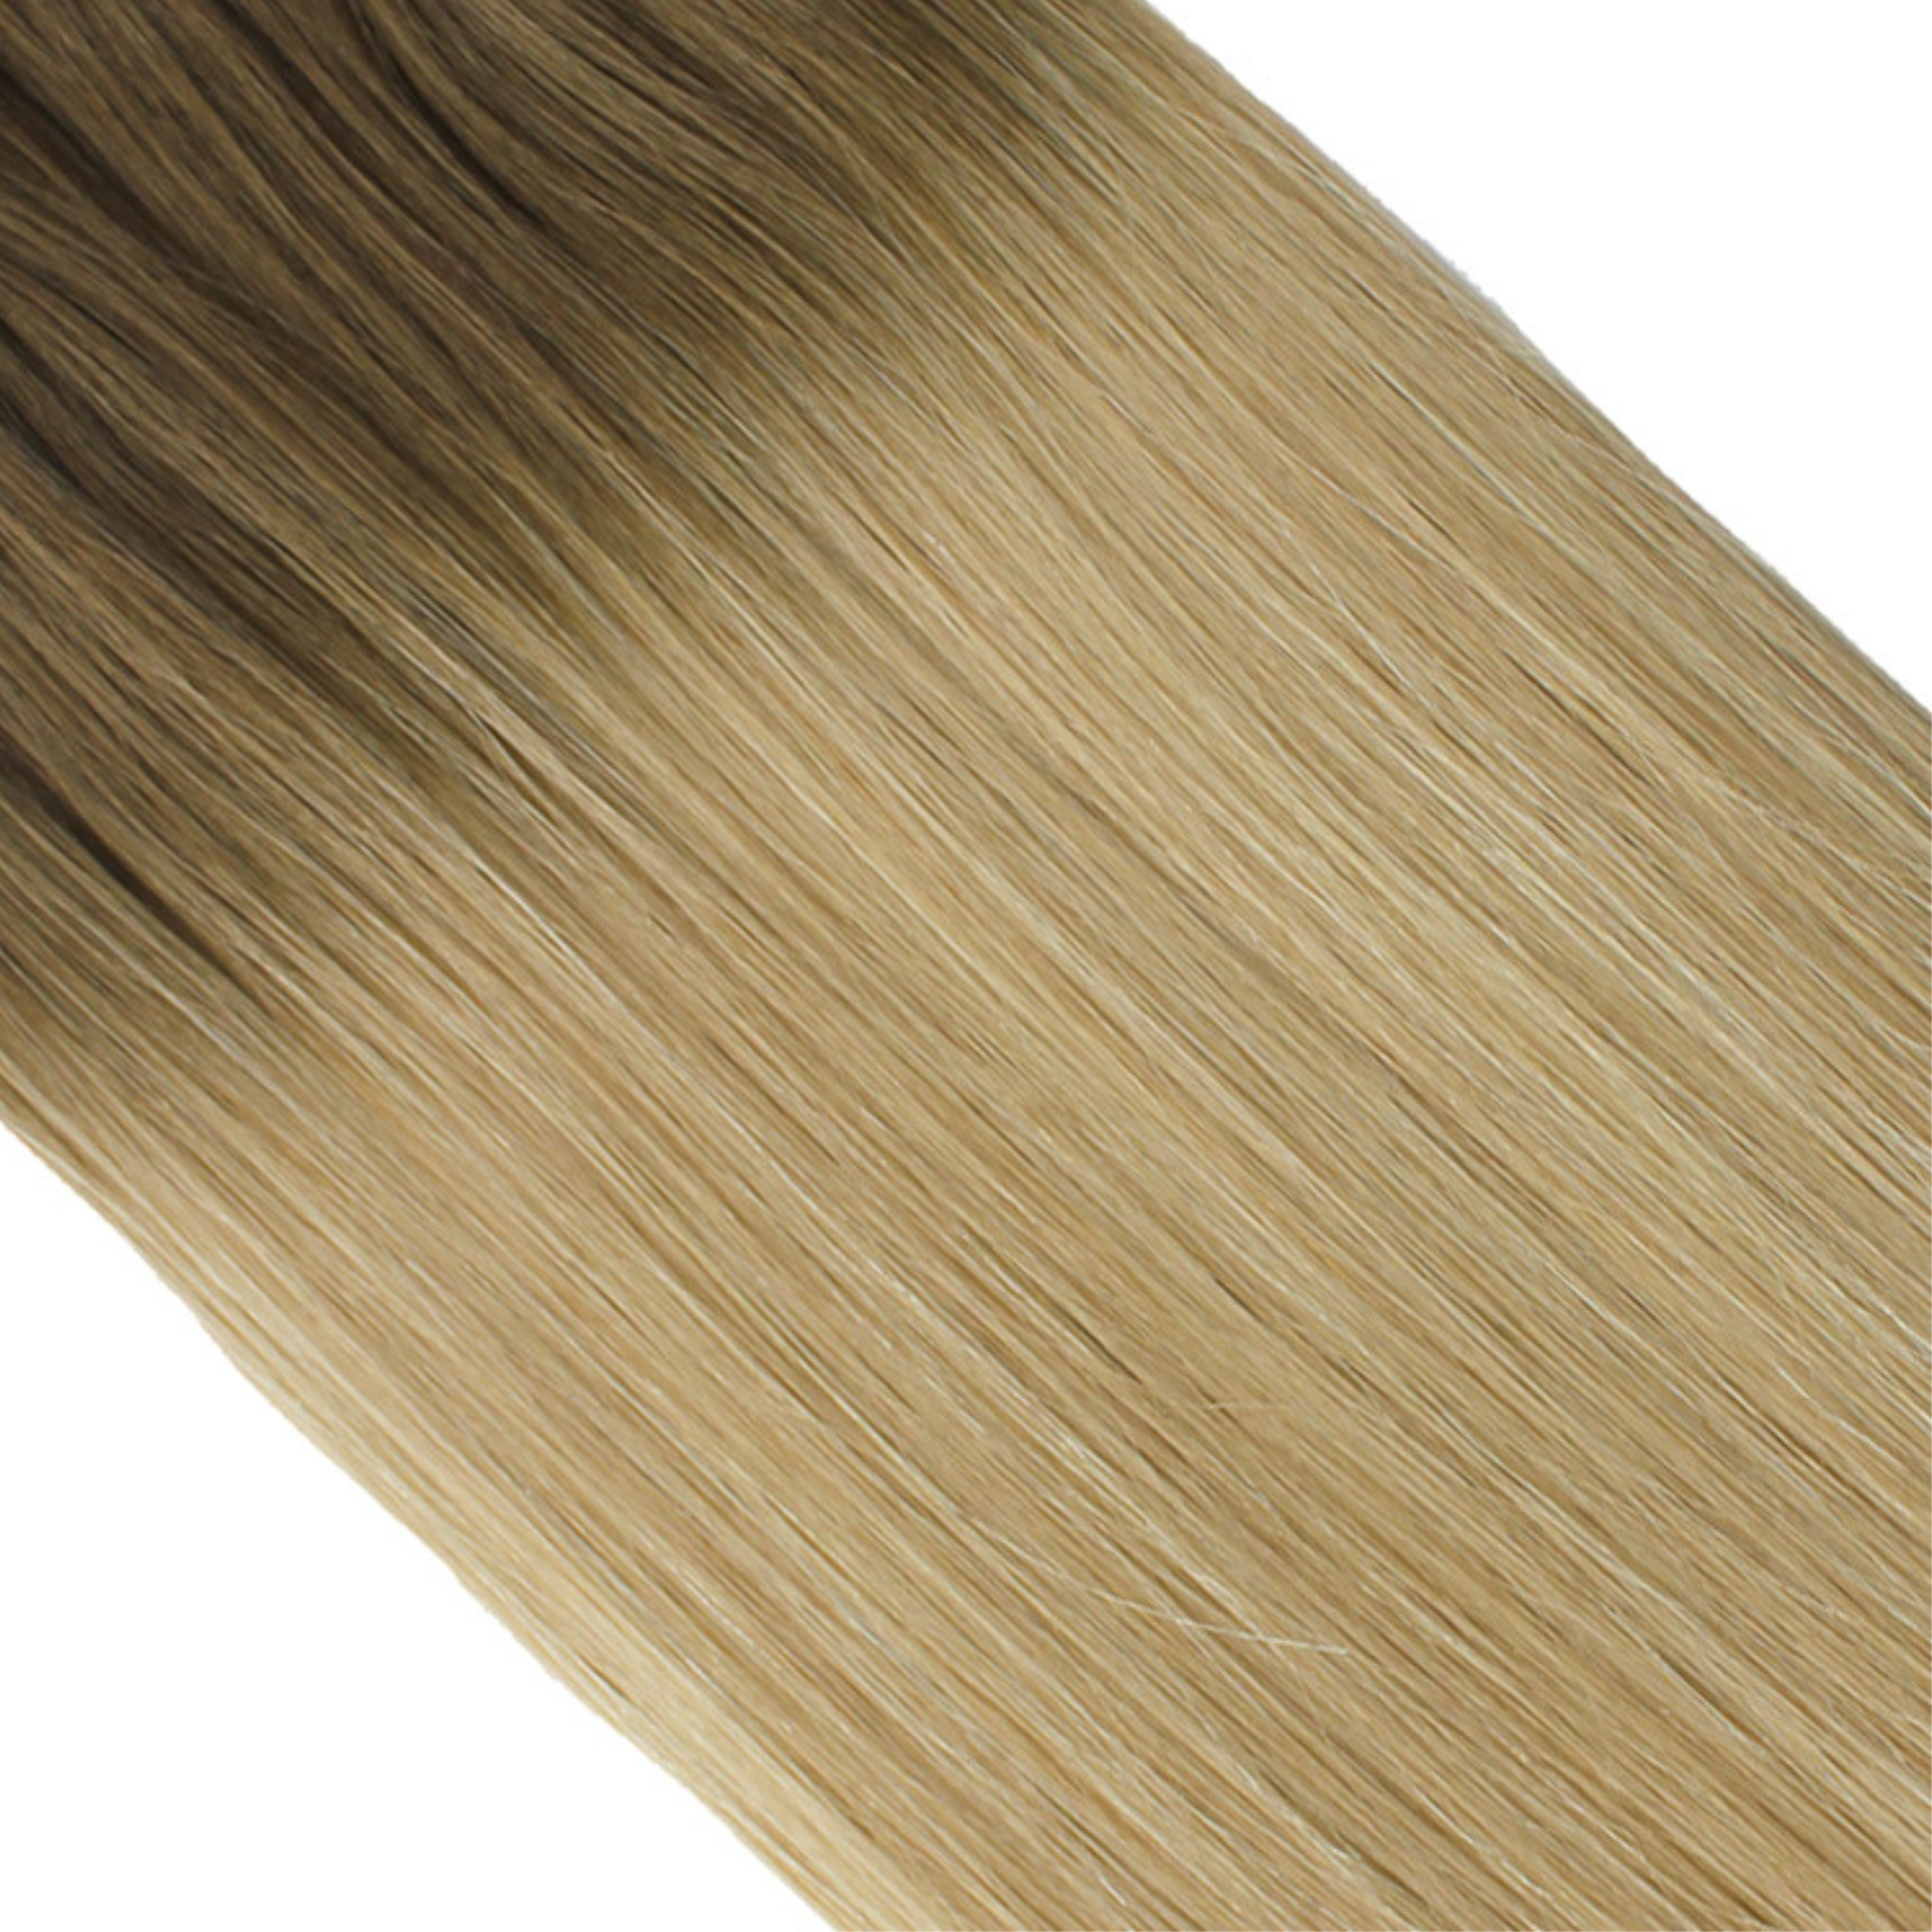 "hair rehab london 18" weft hair extensions shade swatch titled rooted dirty blonde"